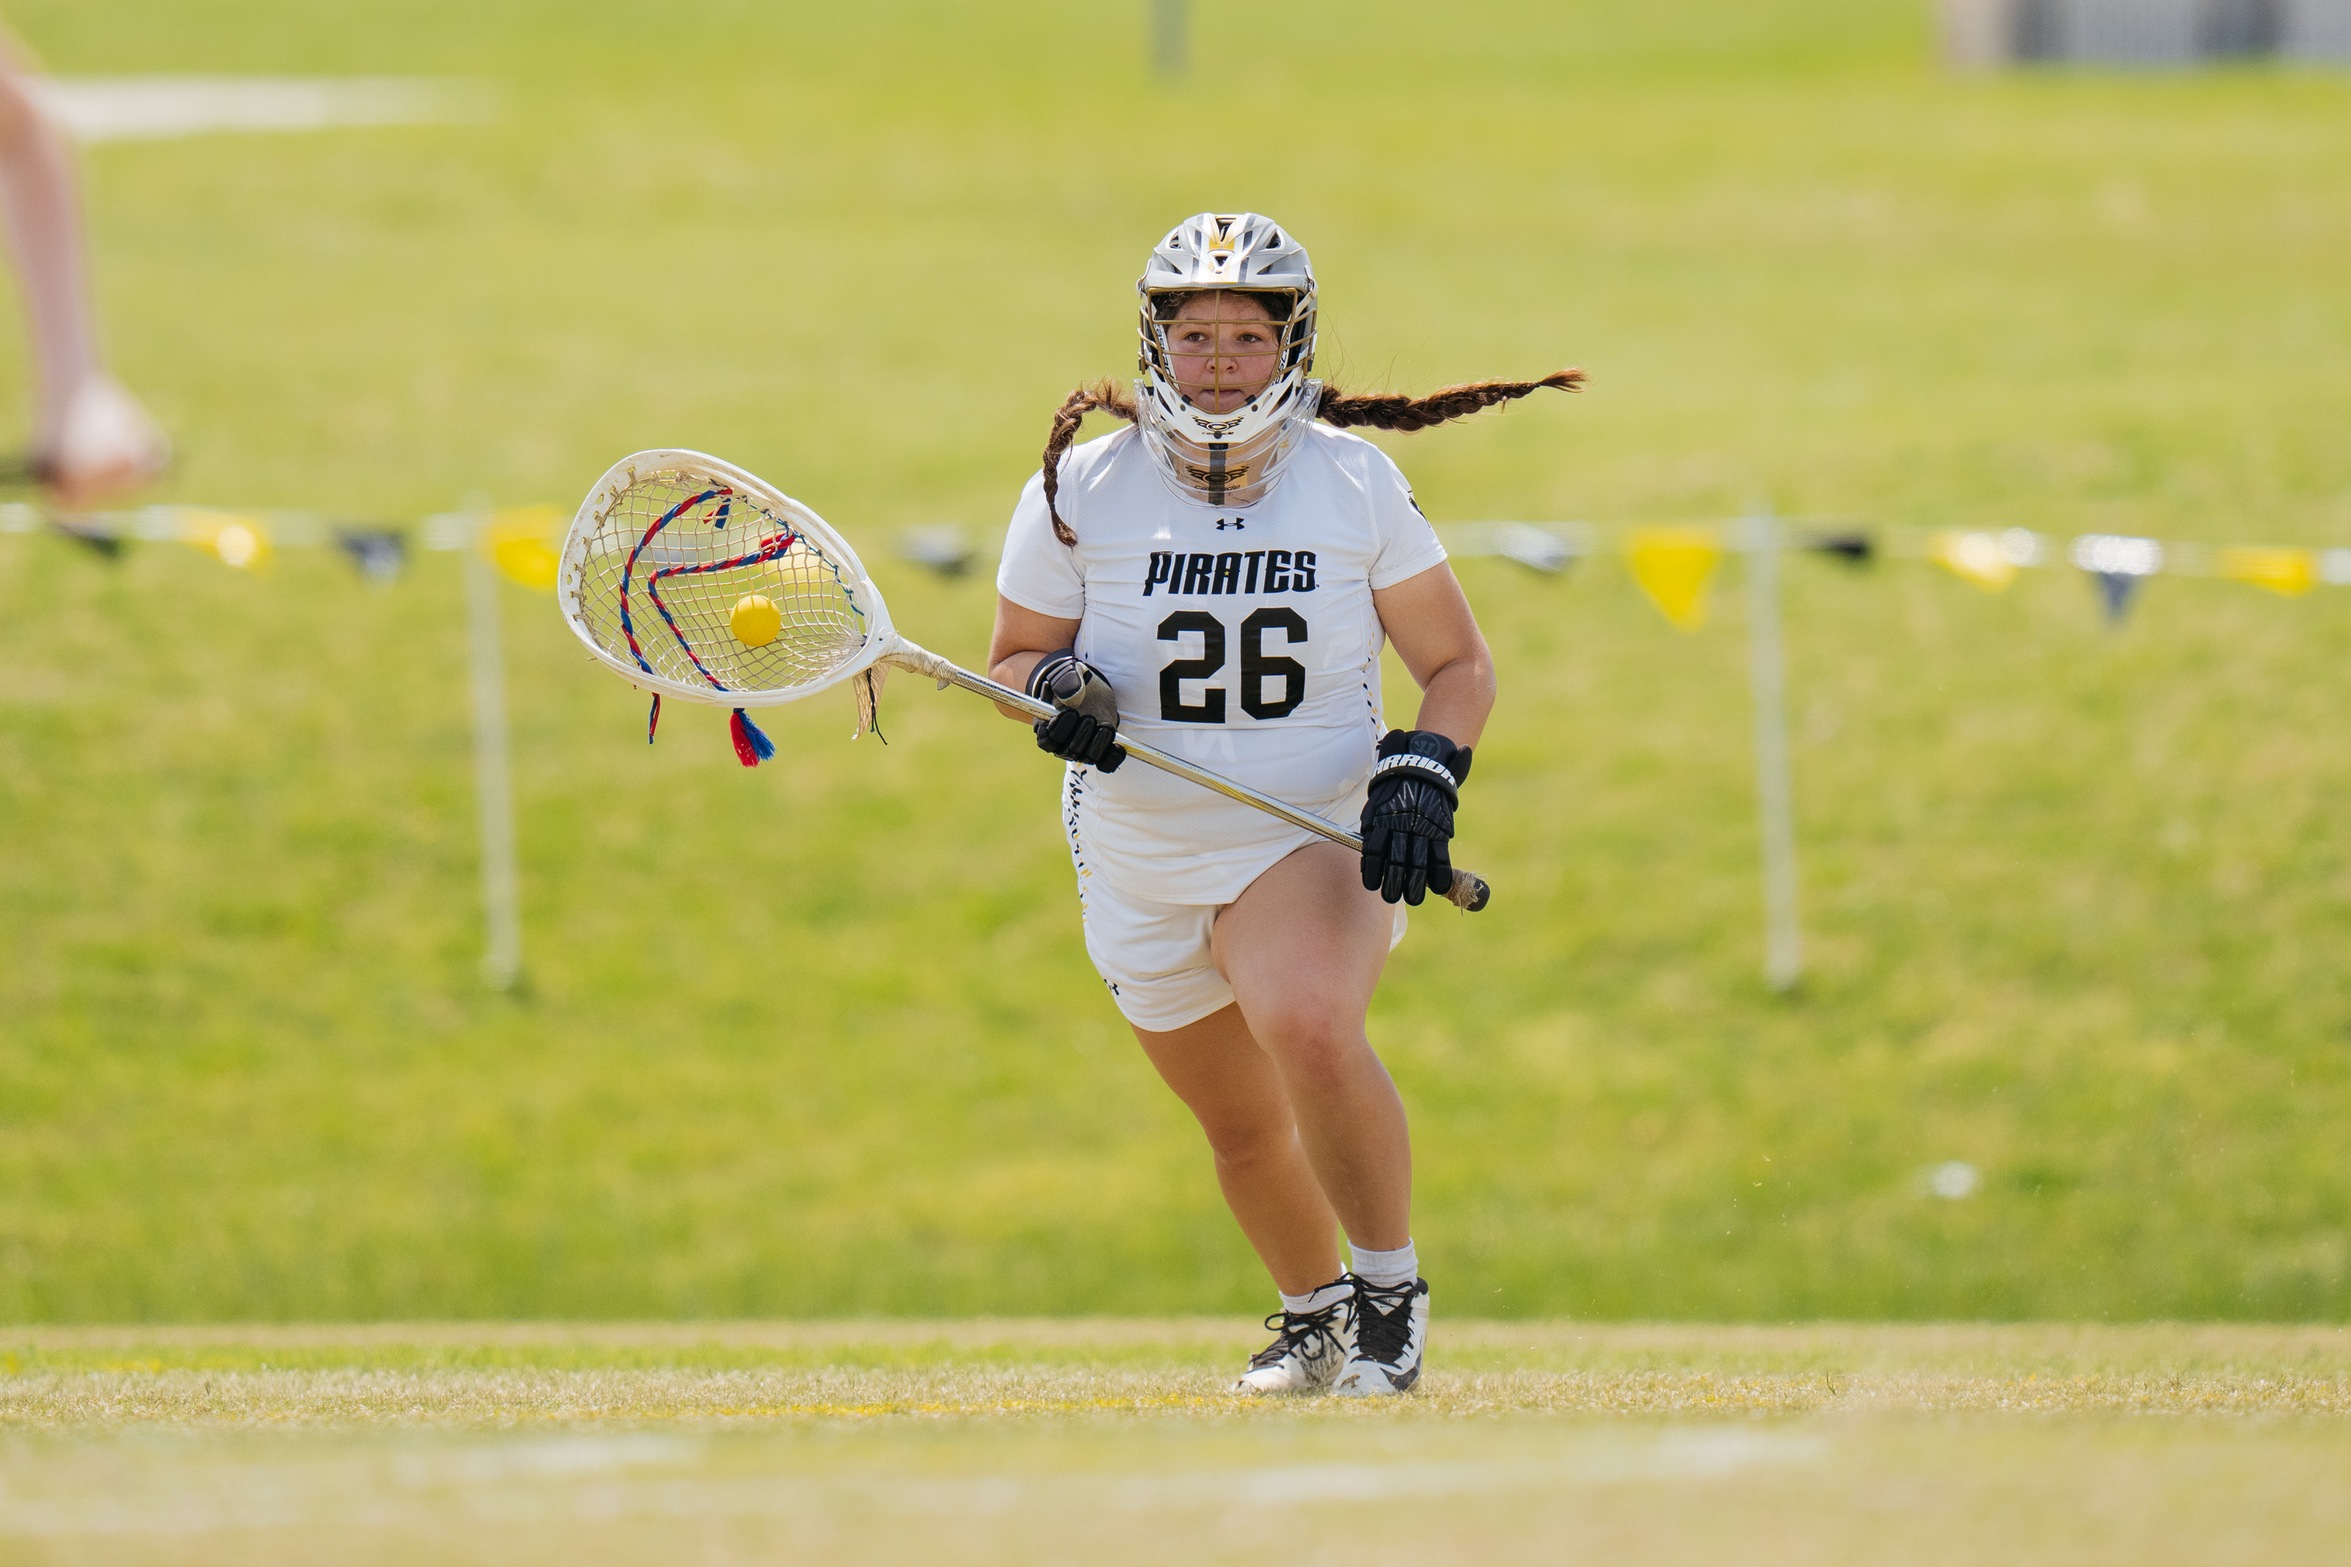 Women's Lacrosse Goes Undefeated at Home, Raven Garcia Has Career Day